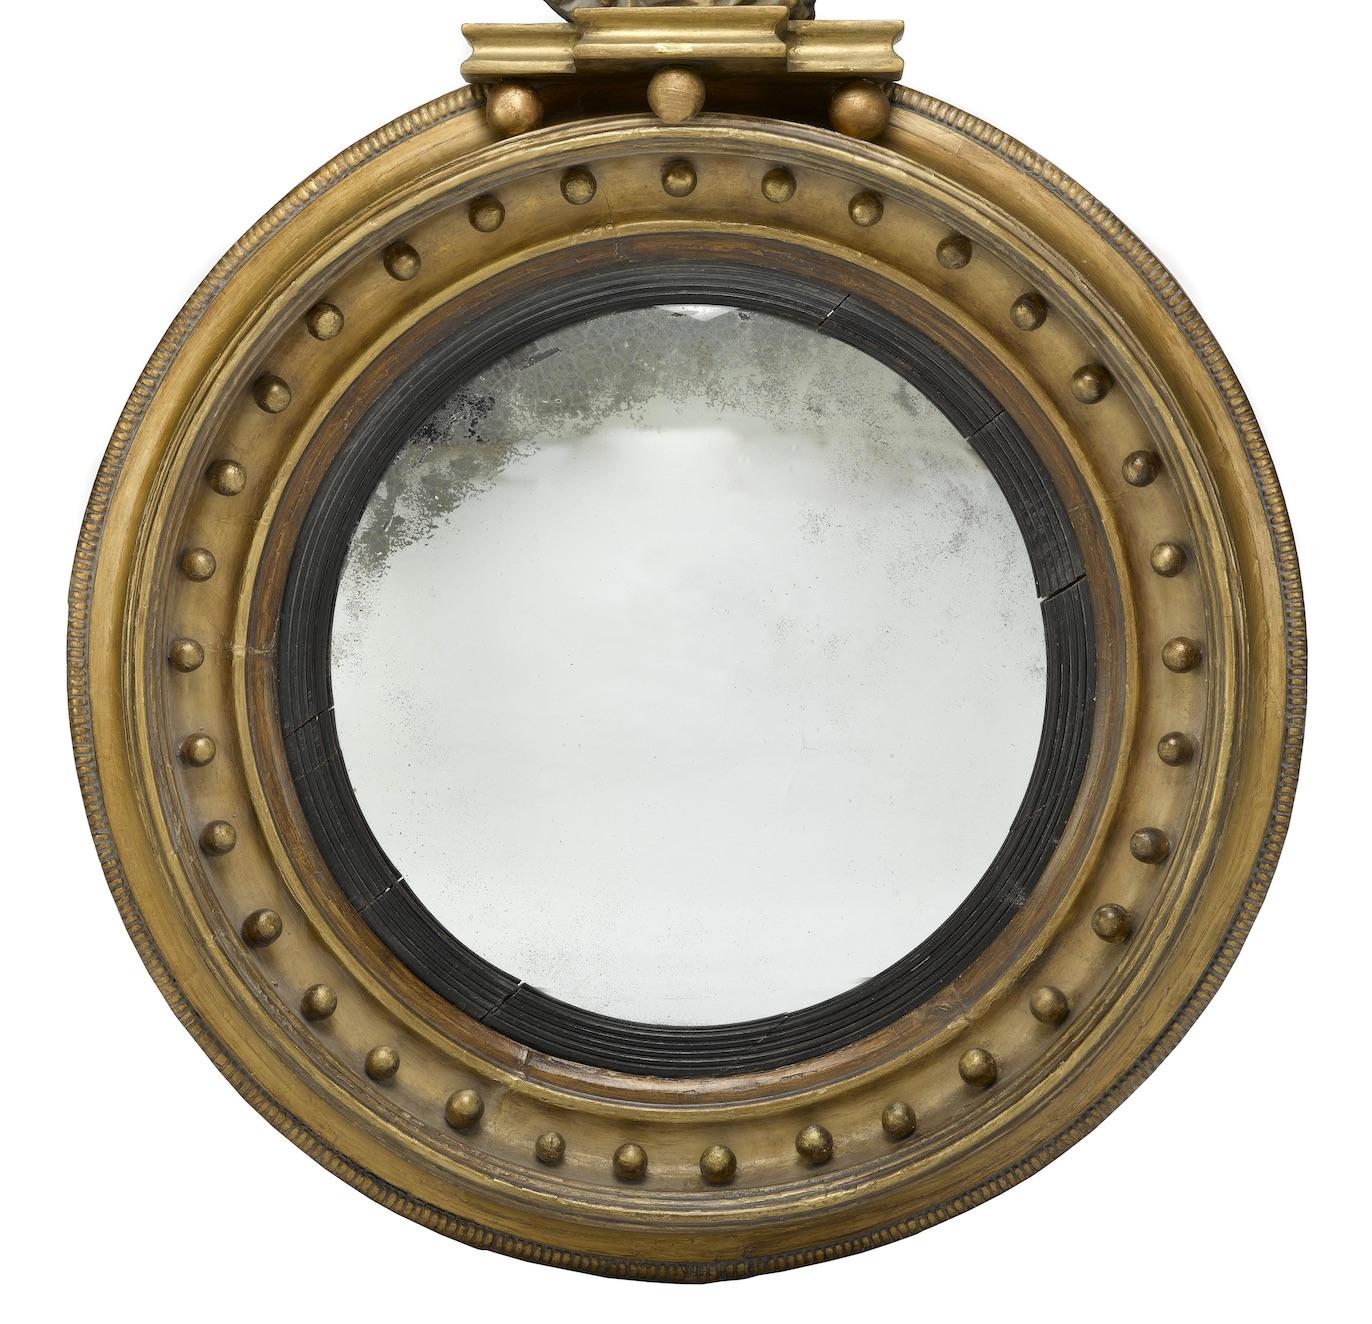 Presented is a Federal period bullseye mirror with a stunning eagle embellishment at top. The mirror frame is hand carved, constructed of a hardwood, and overlaid by gold leaf. At top is an eagle perched on a small Doric column. The mirror frame